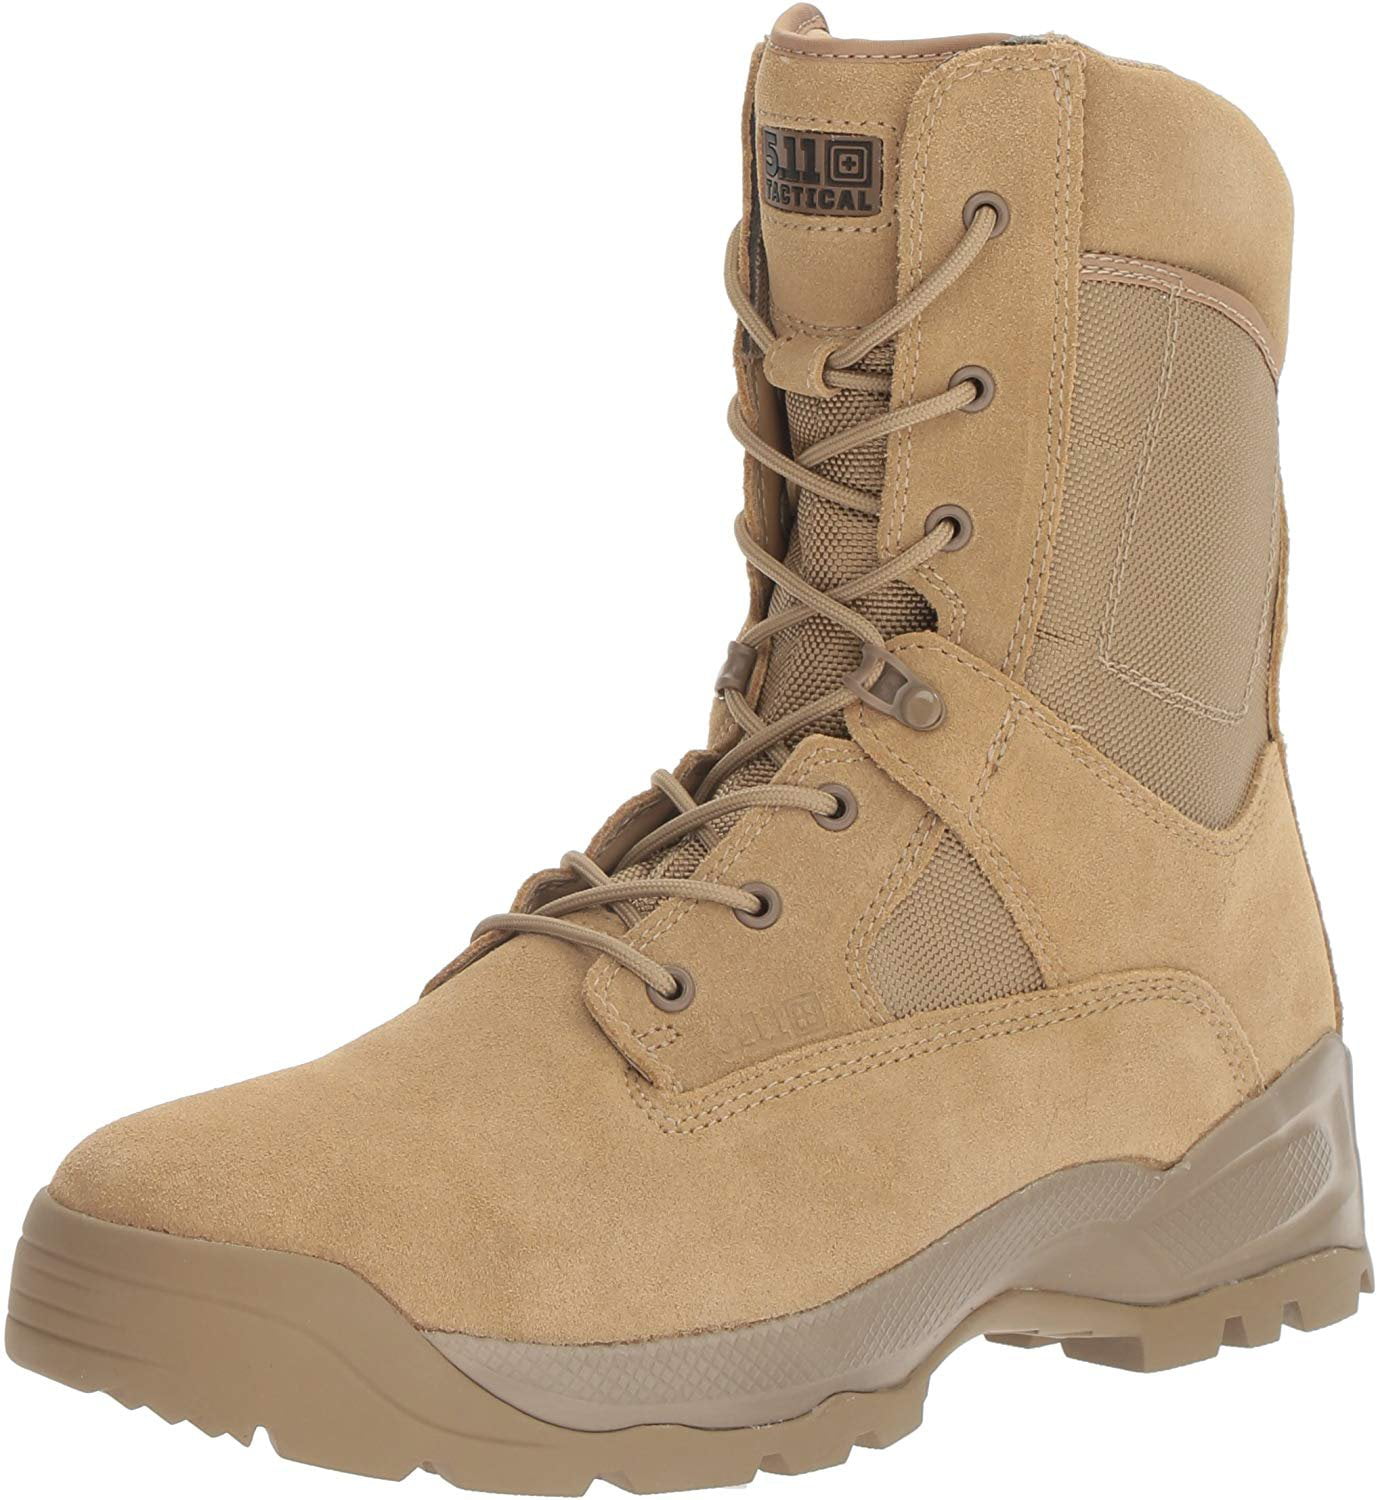 5.11 Tactical 5.11 Tactical ATAC Men's 8" Leather Jungle Combat Military Boots, Style 12110